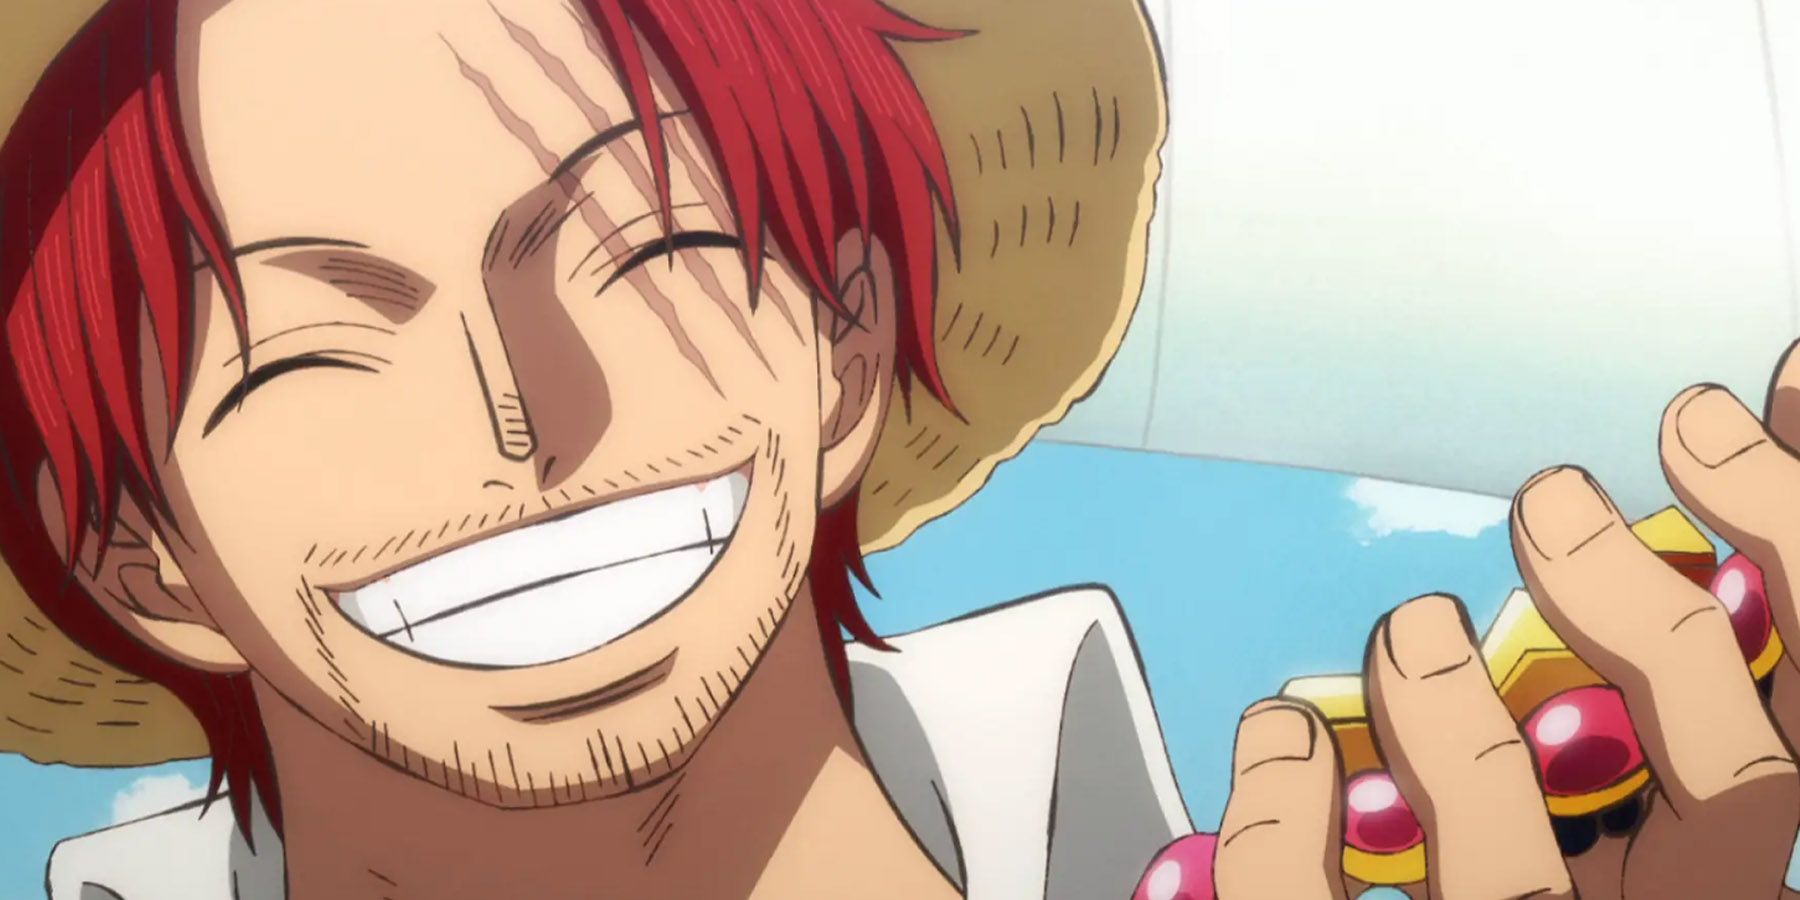 Red-Haired Shanks